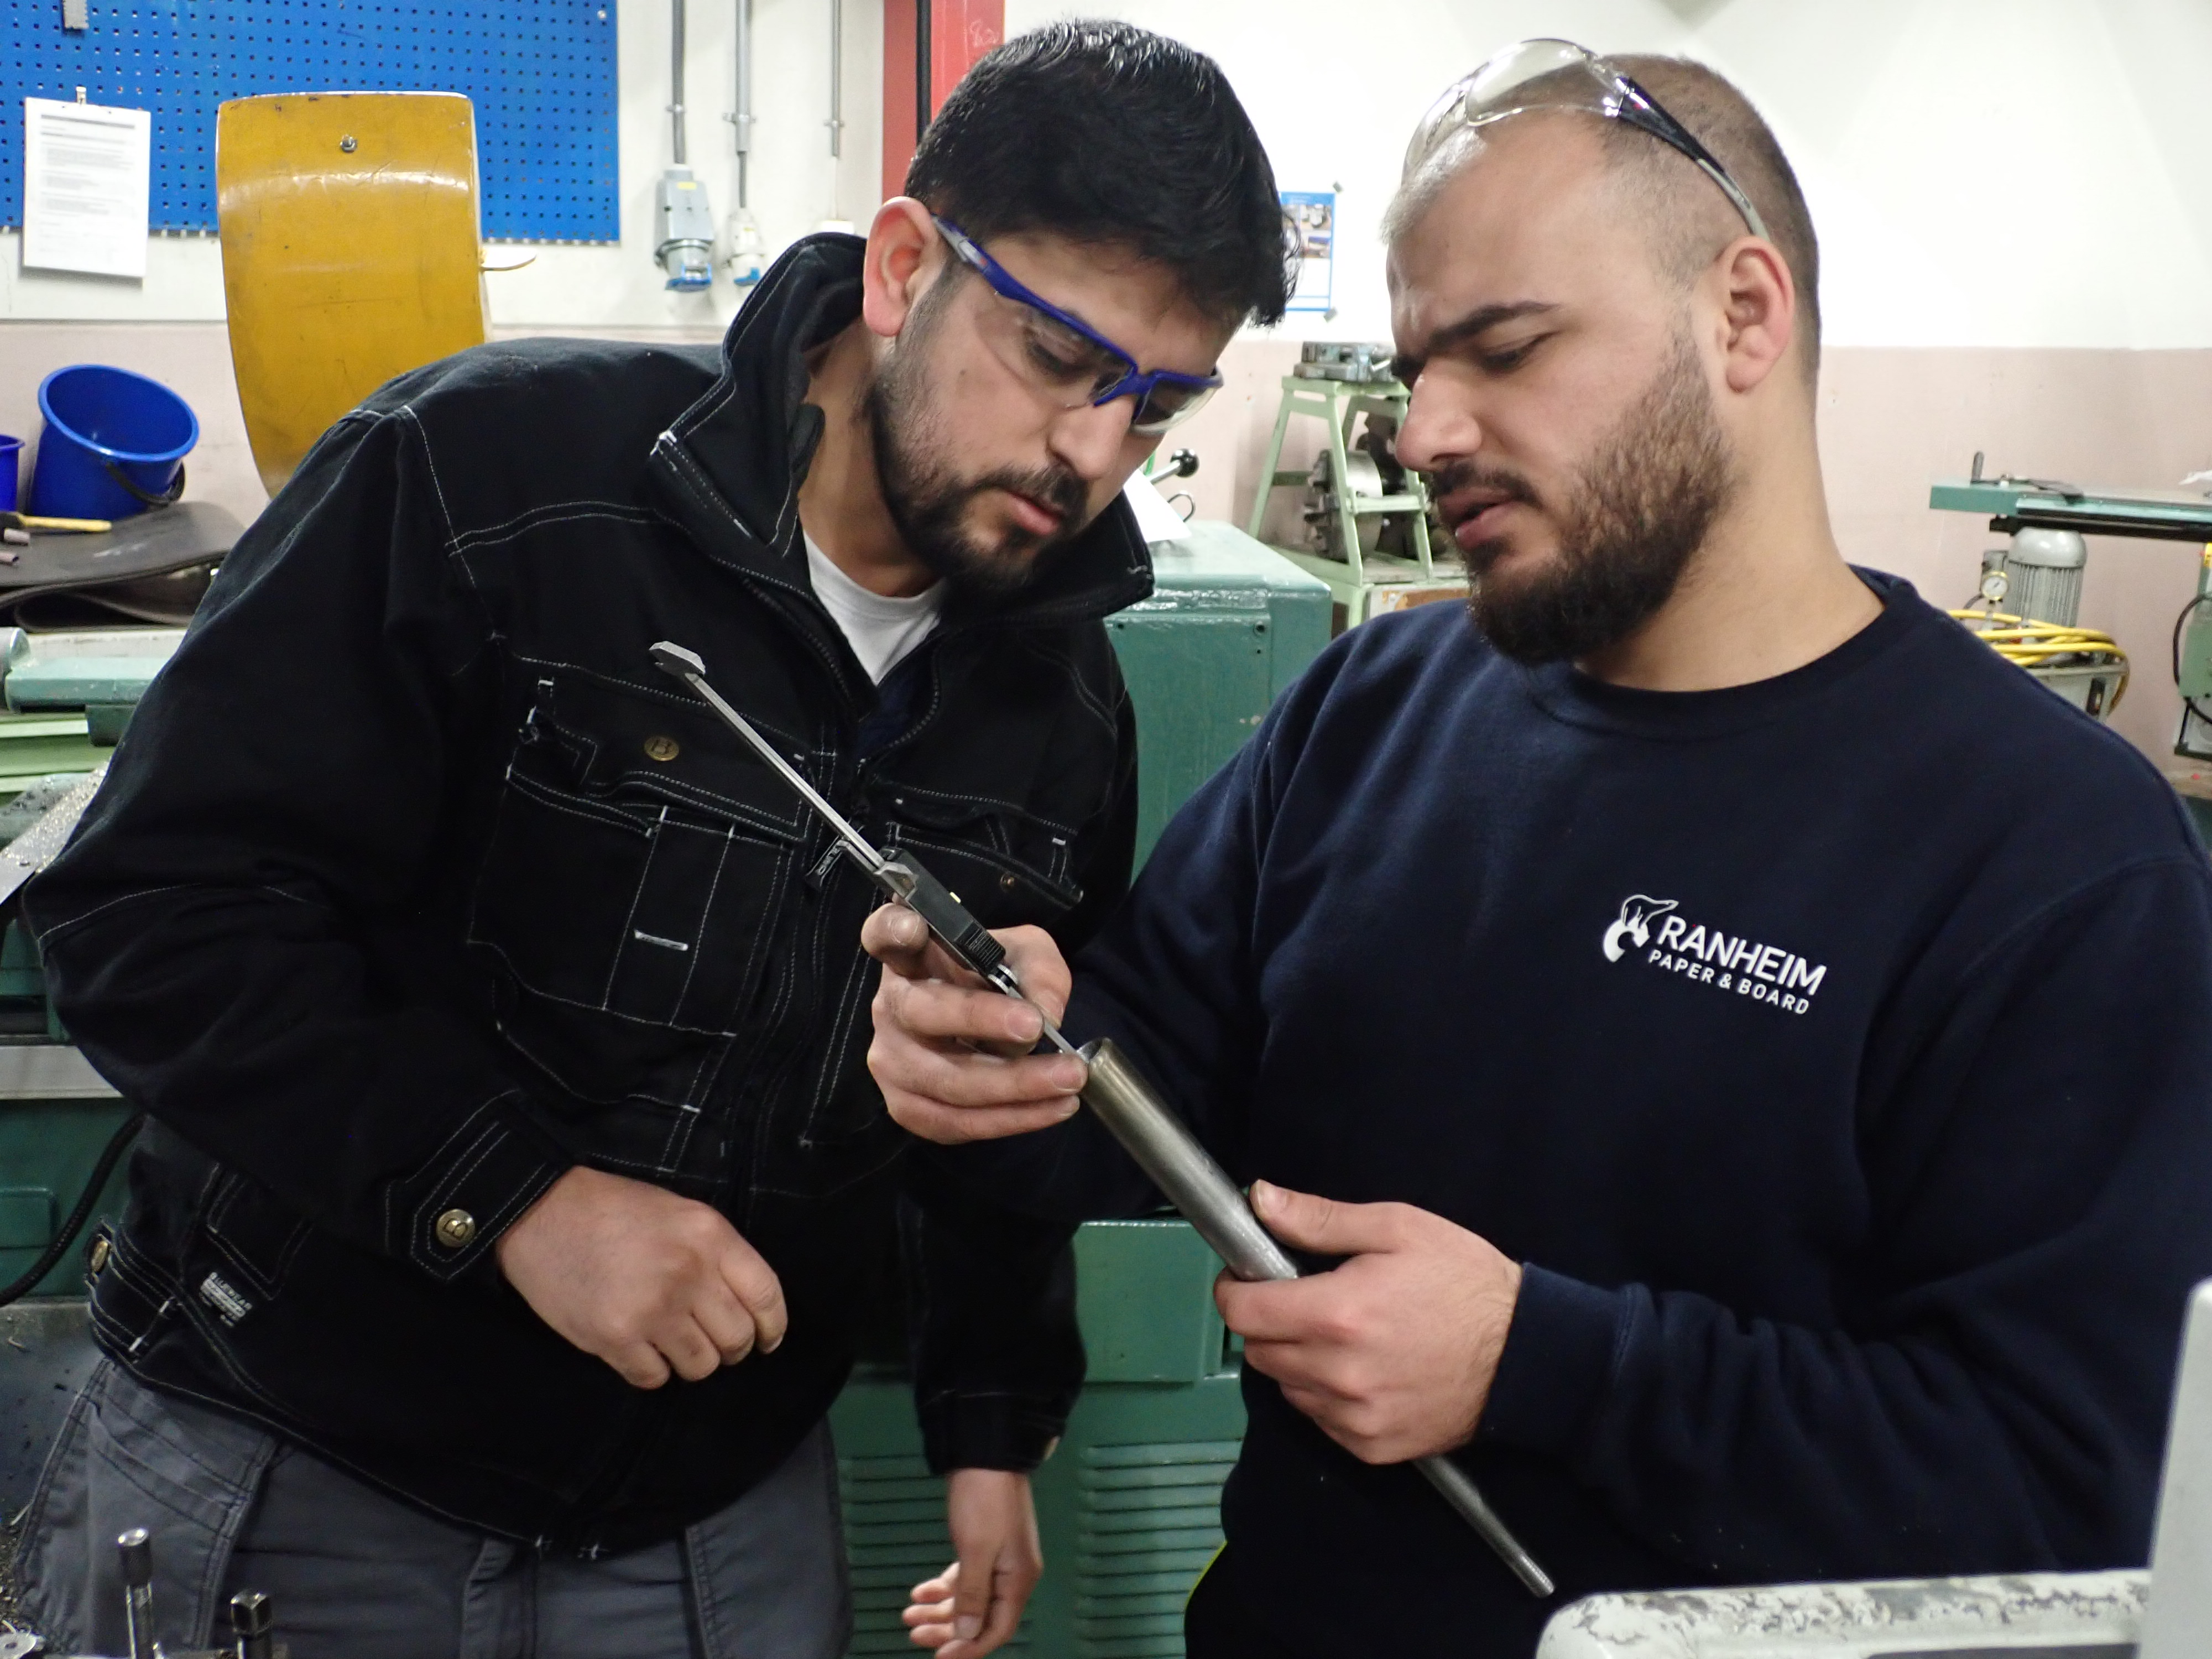 VET students from mechanical industry are learning how to use a tool